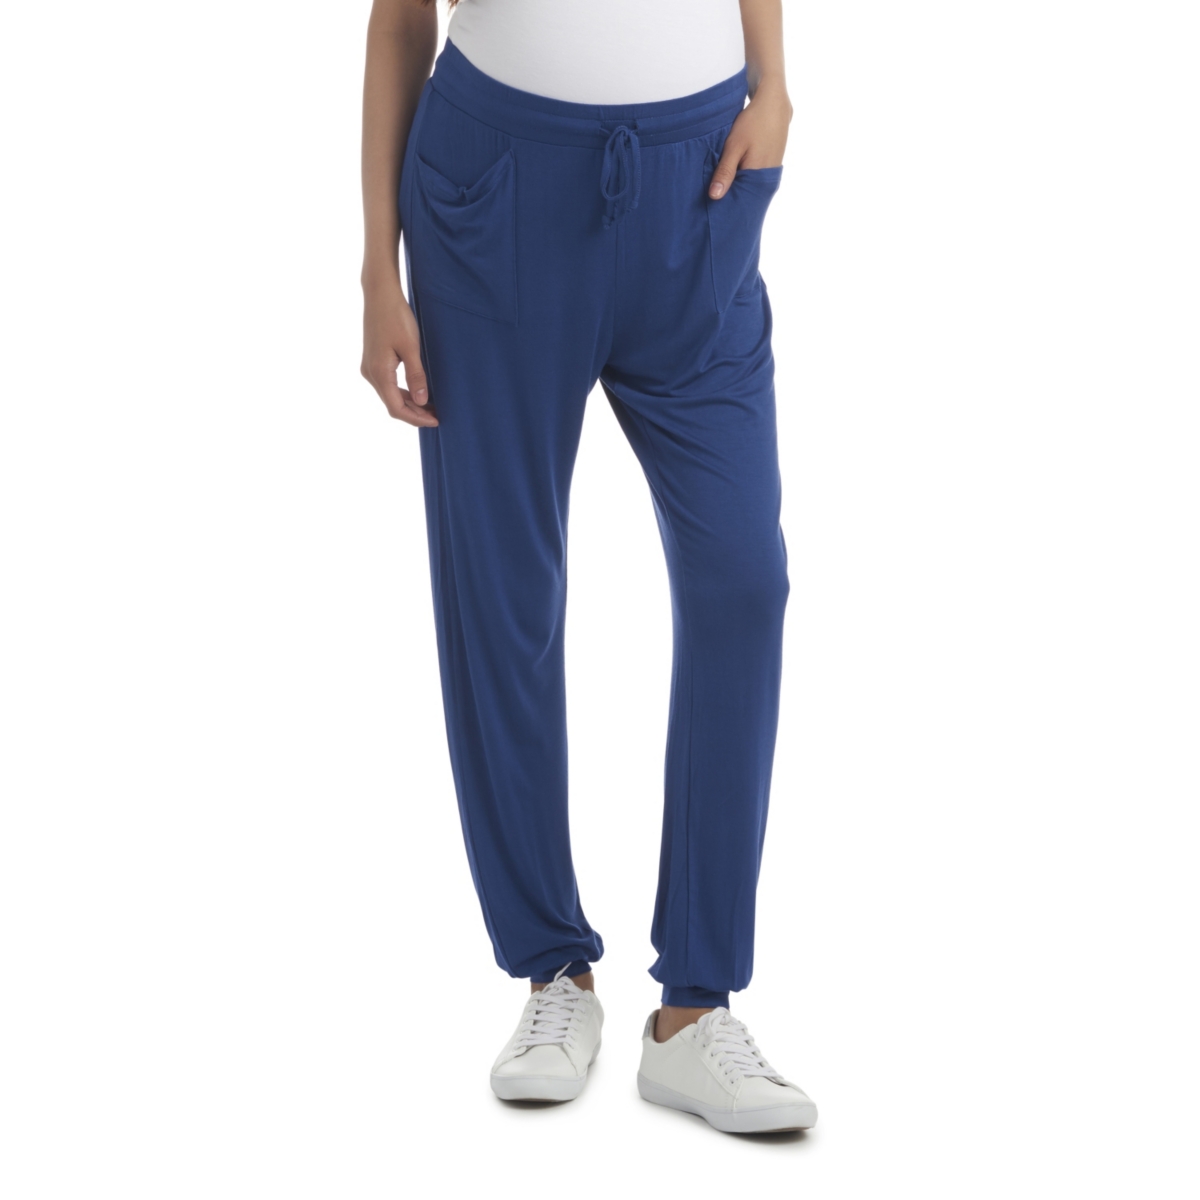 Everly Grey Women's Everly Grey Carmen During & After Jogger Pants